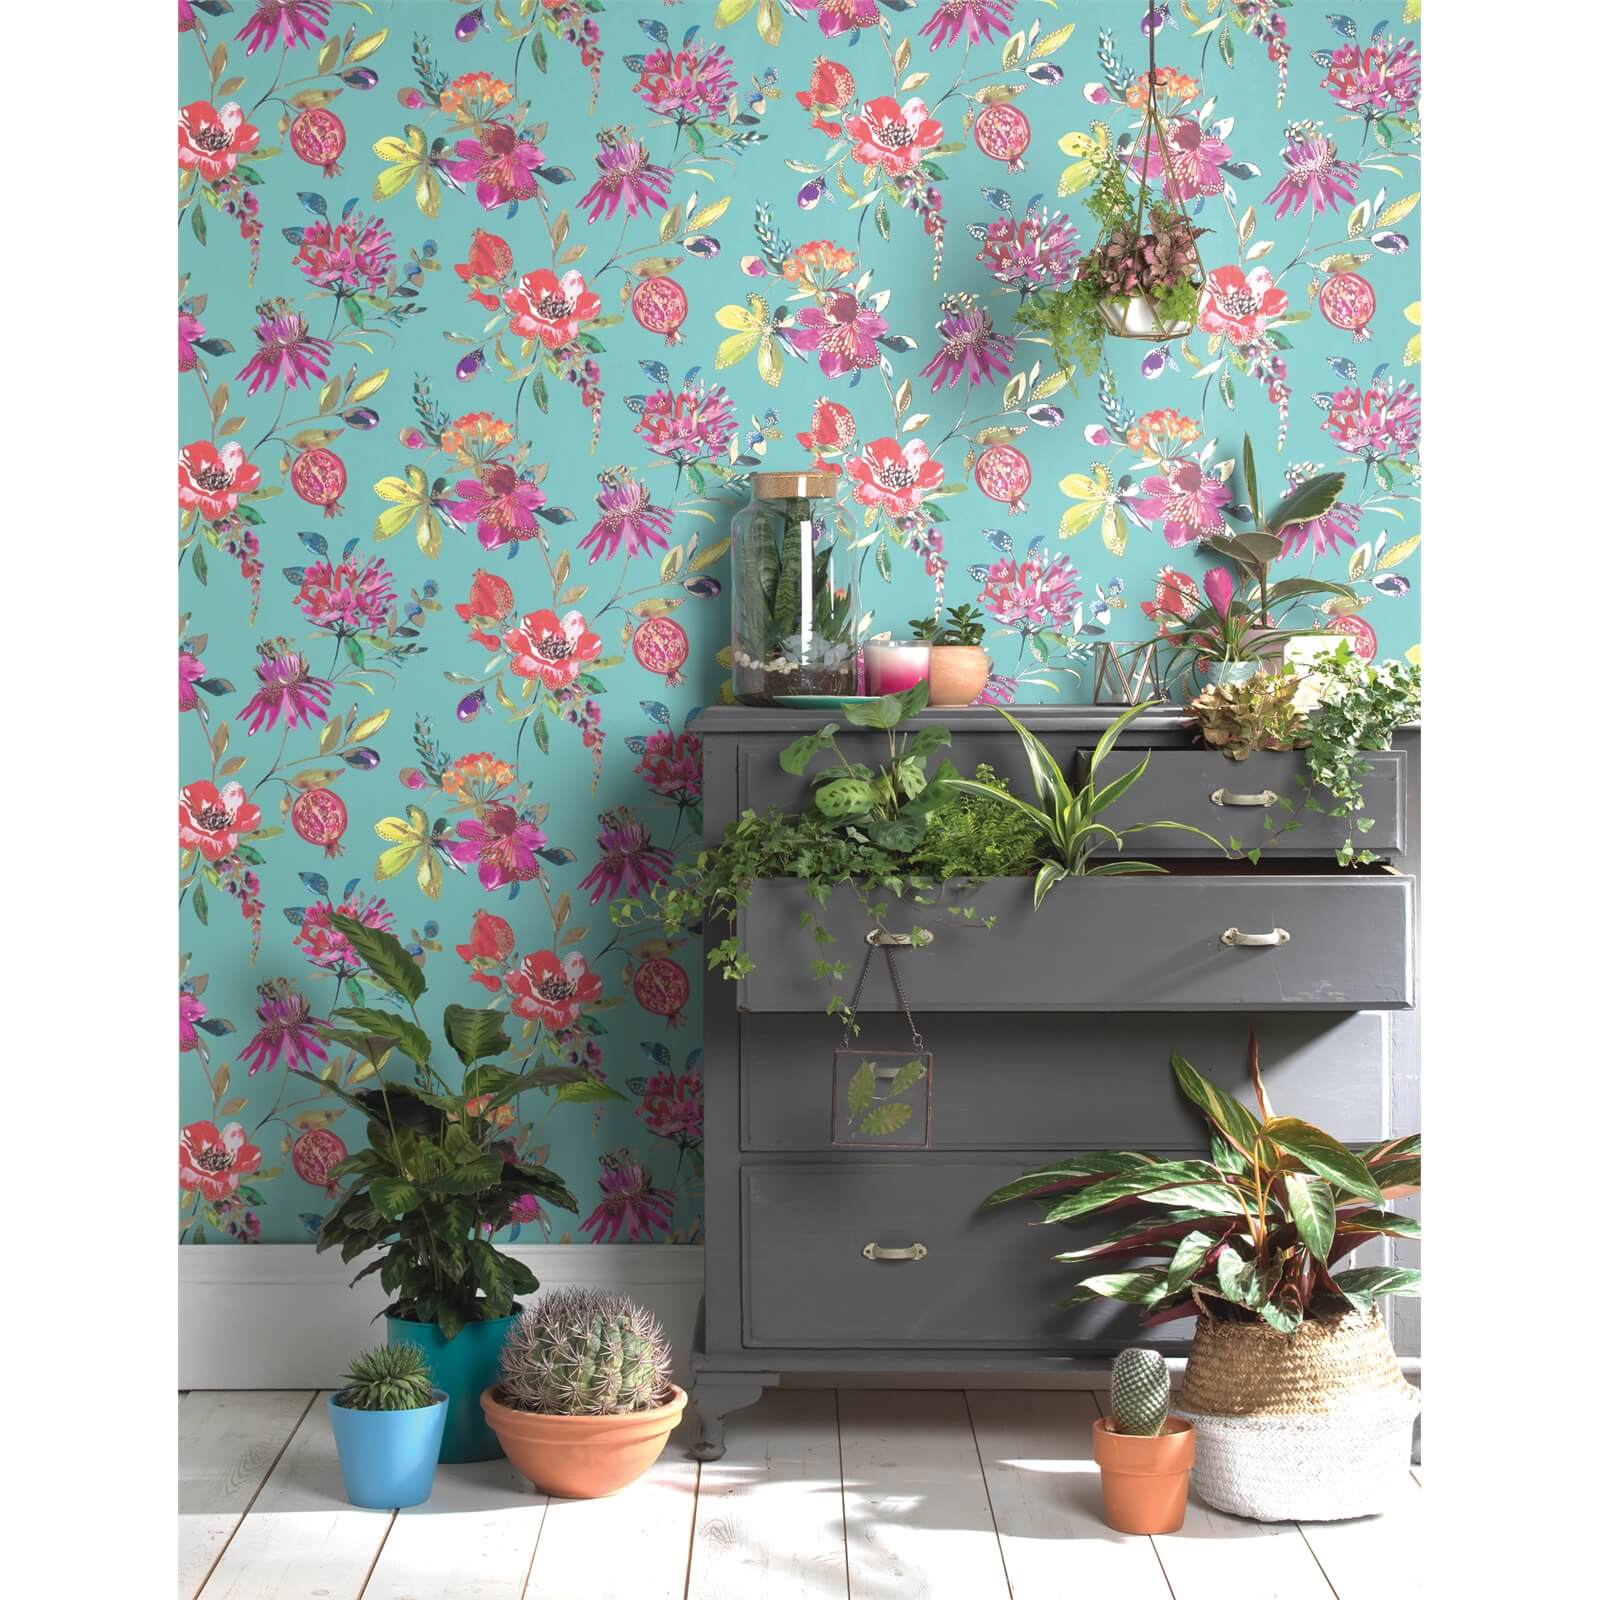 Holden Decor Punica Floral Smooth Metallic Soft Teal Wallpaper